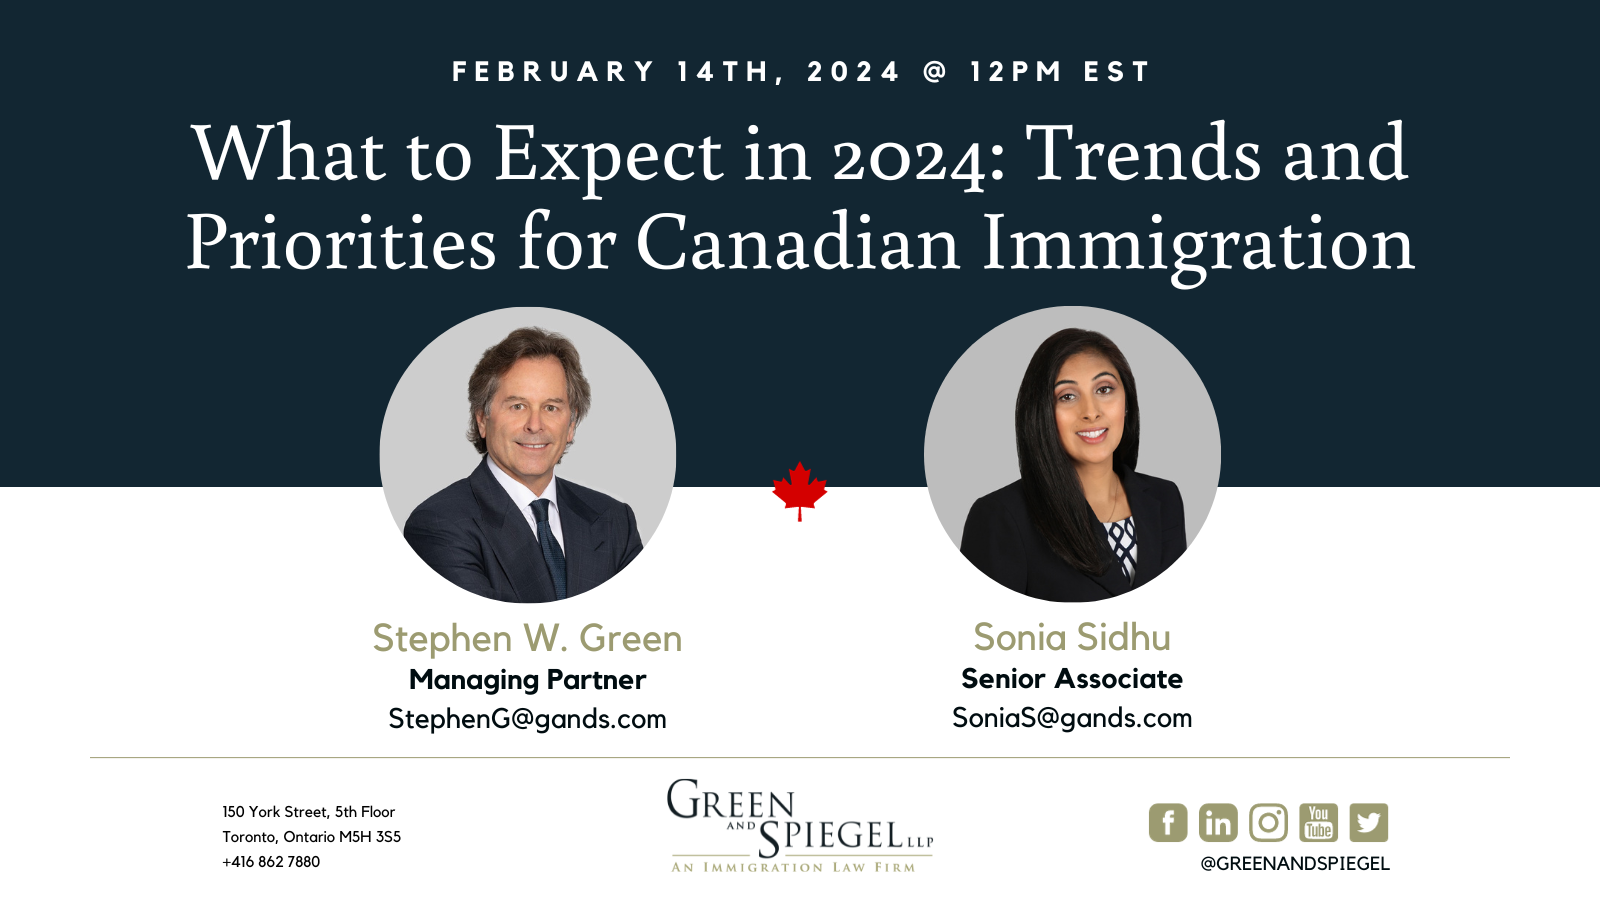 What to Expect in 2024: Trends and Priorities for Canadian Immigration